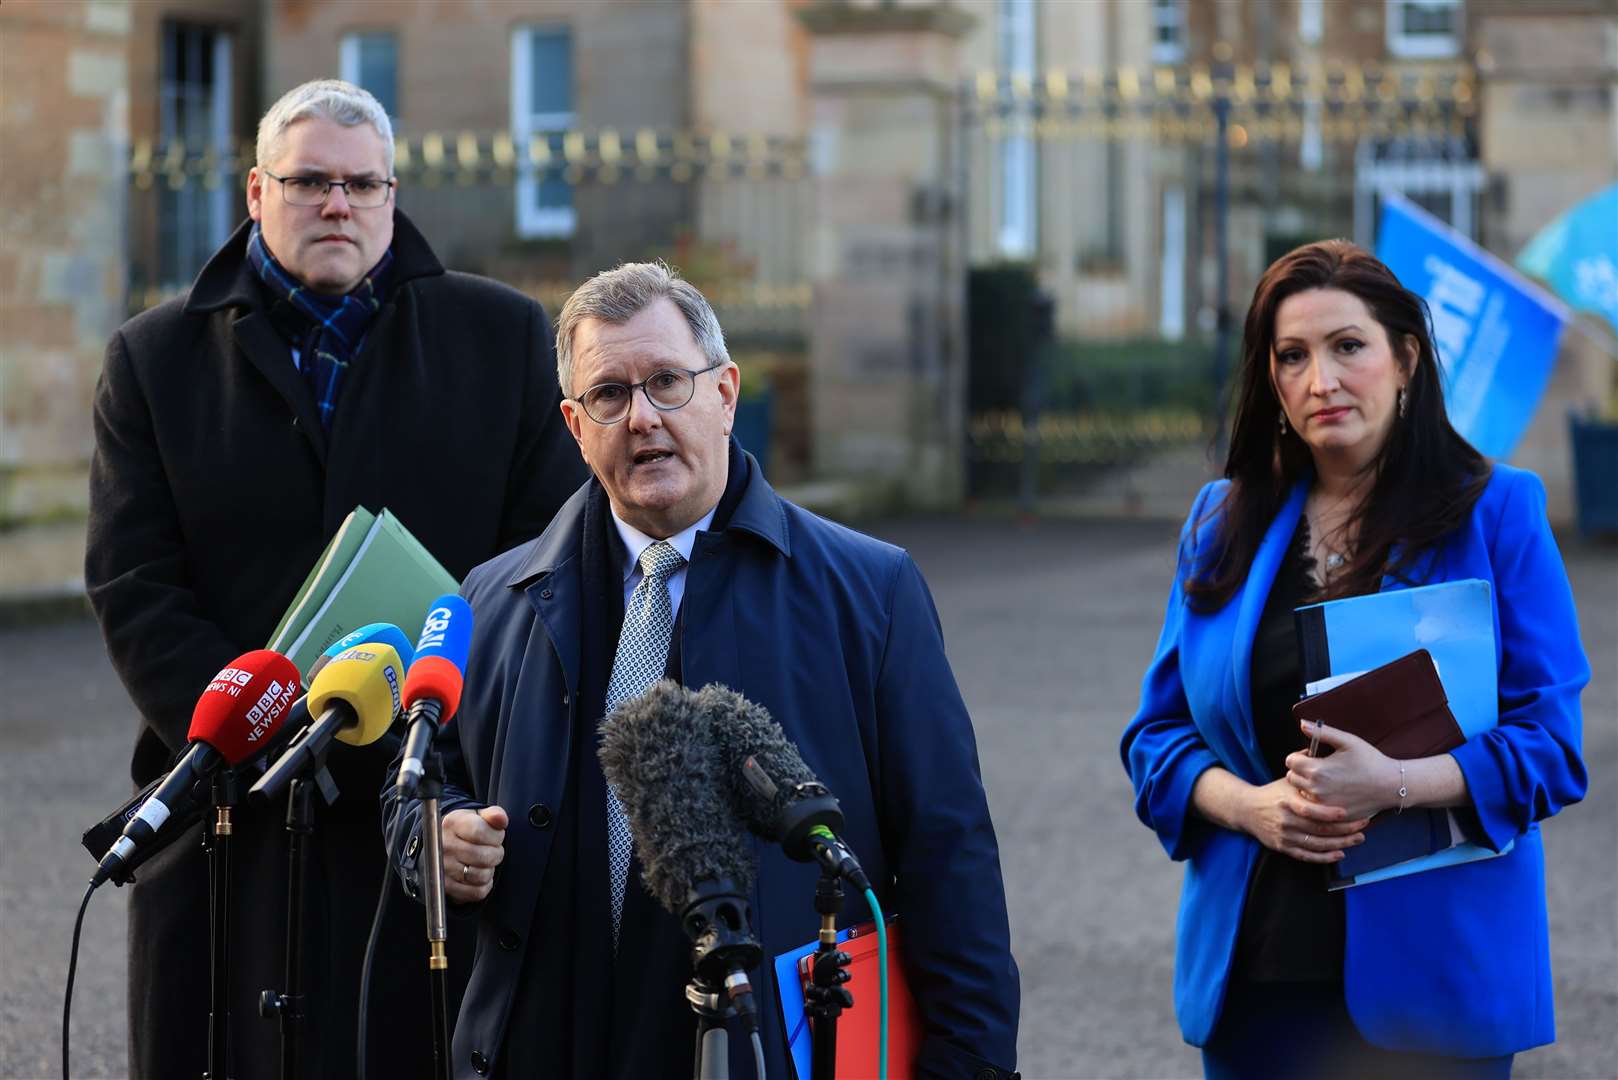 DUP leader Sir Jeffrey Donaldson, centre, with fellow party officers Emma Little-Pengelly and deputy leader Gavin Robinson (PA)